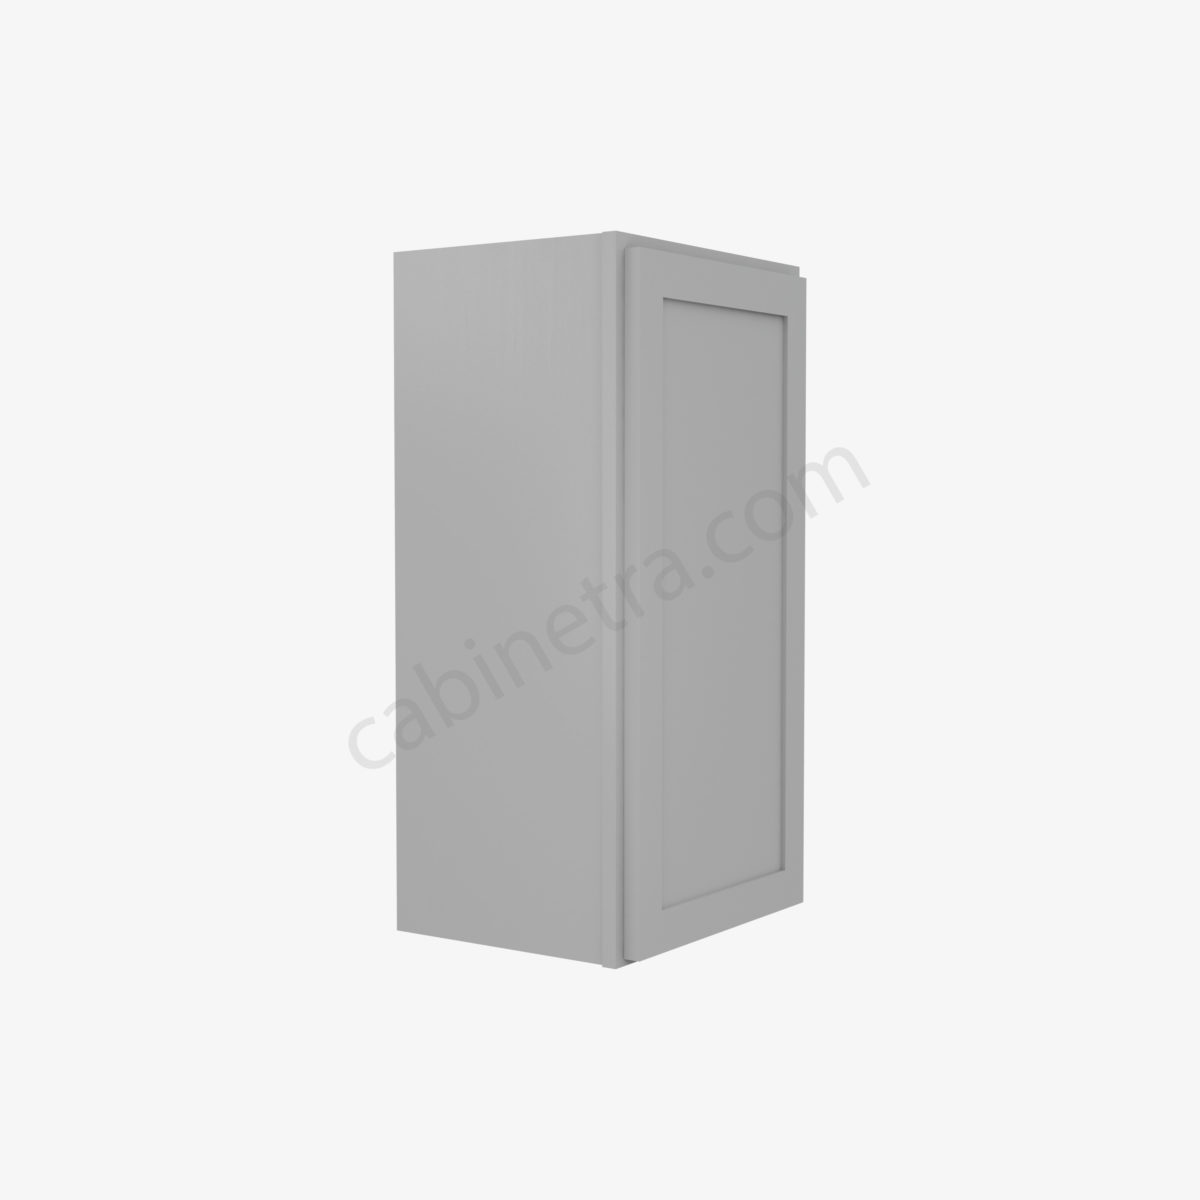 AB W1530 4 Forevermark Lait Gray Shaker Cabinetra scaled